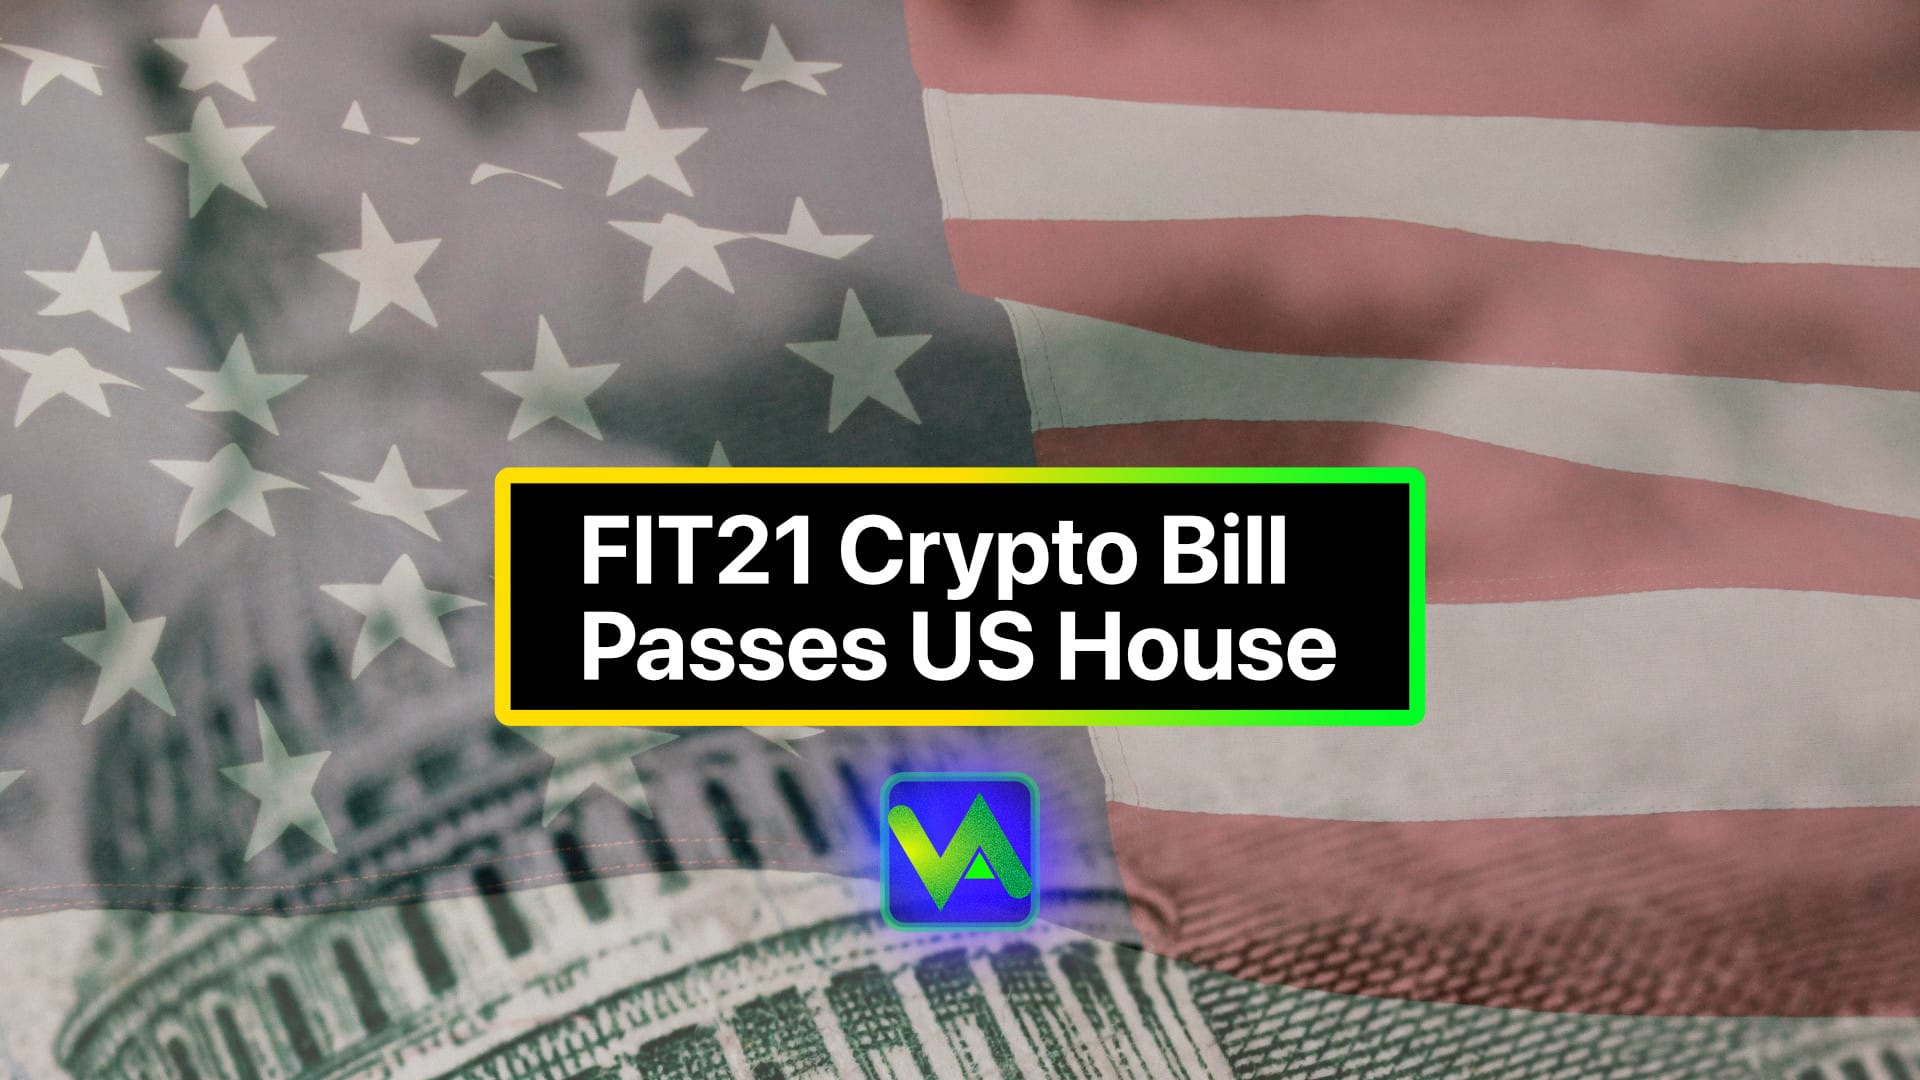 FIT21 Act Clears US House With Bipartisan Support, Redefines Crypto Rules